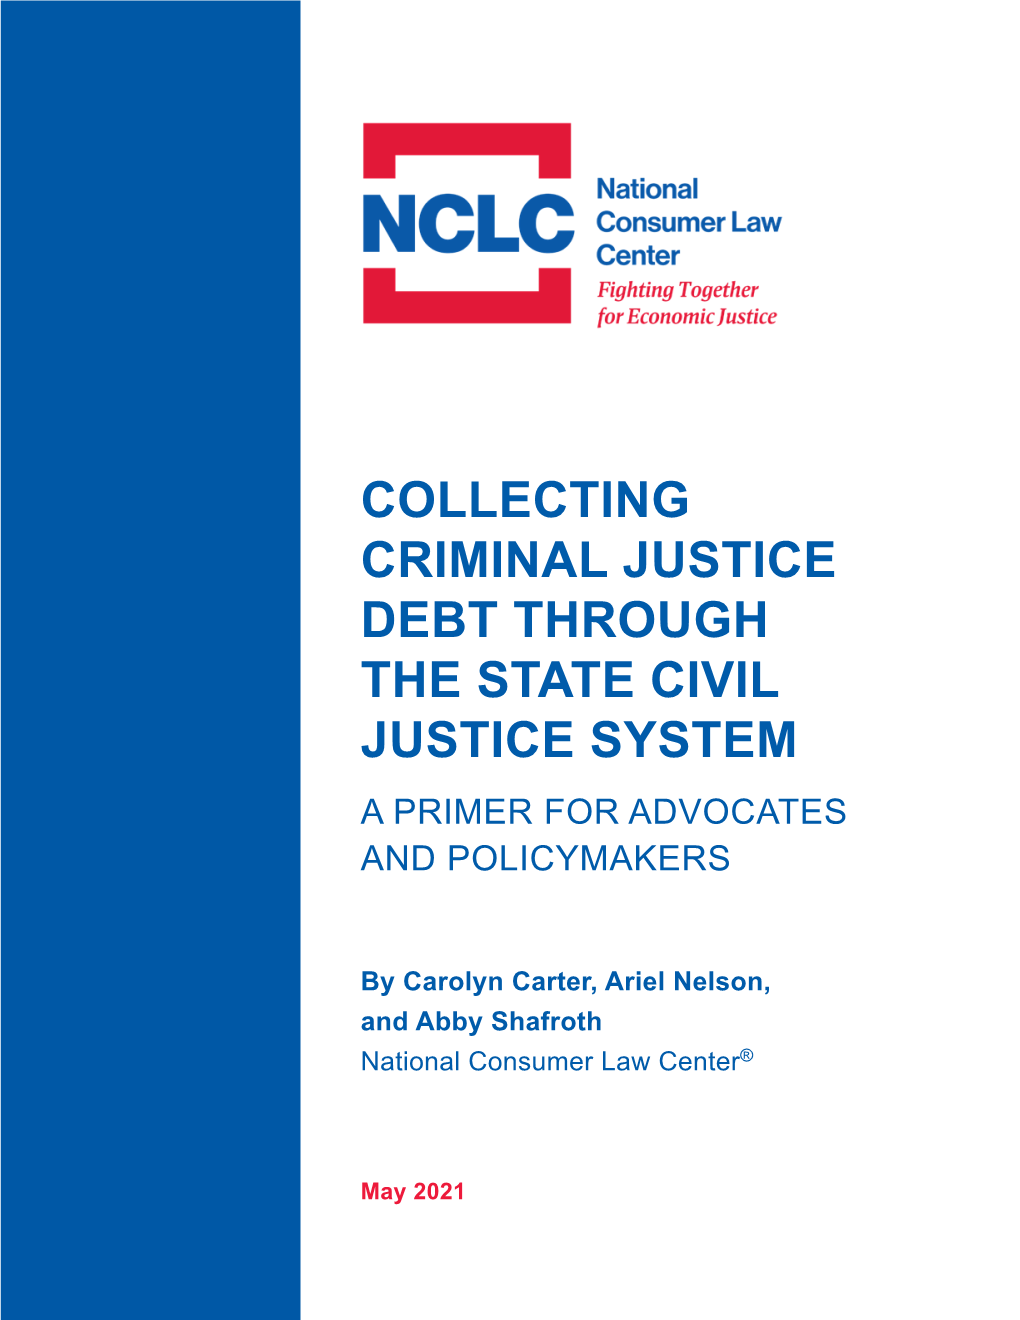 Collecting Criminal Justice Debt Through the State Civil Justice System a Primer for Advocates and Policymakers